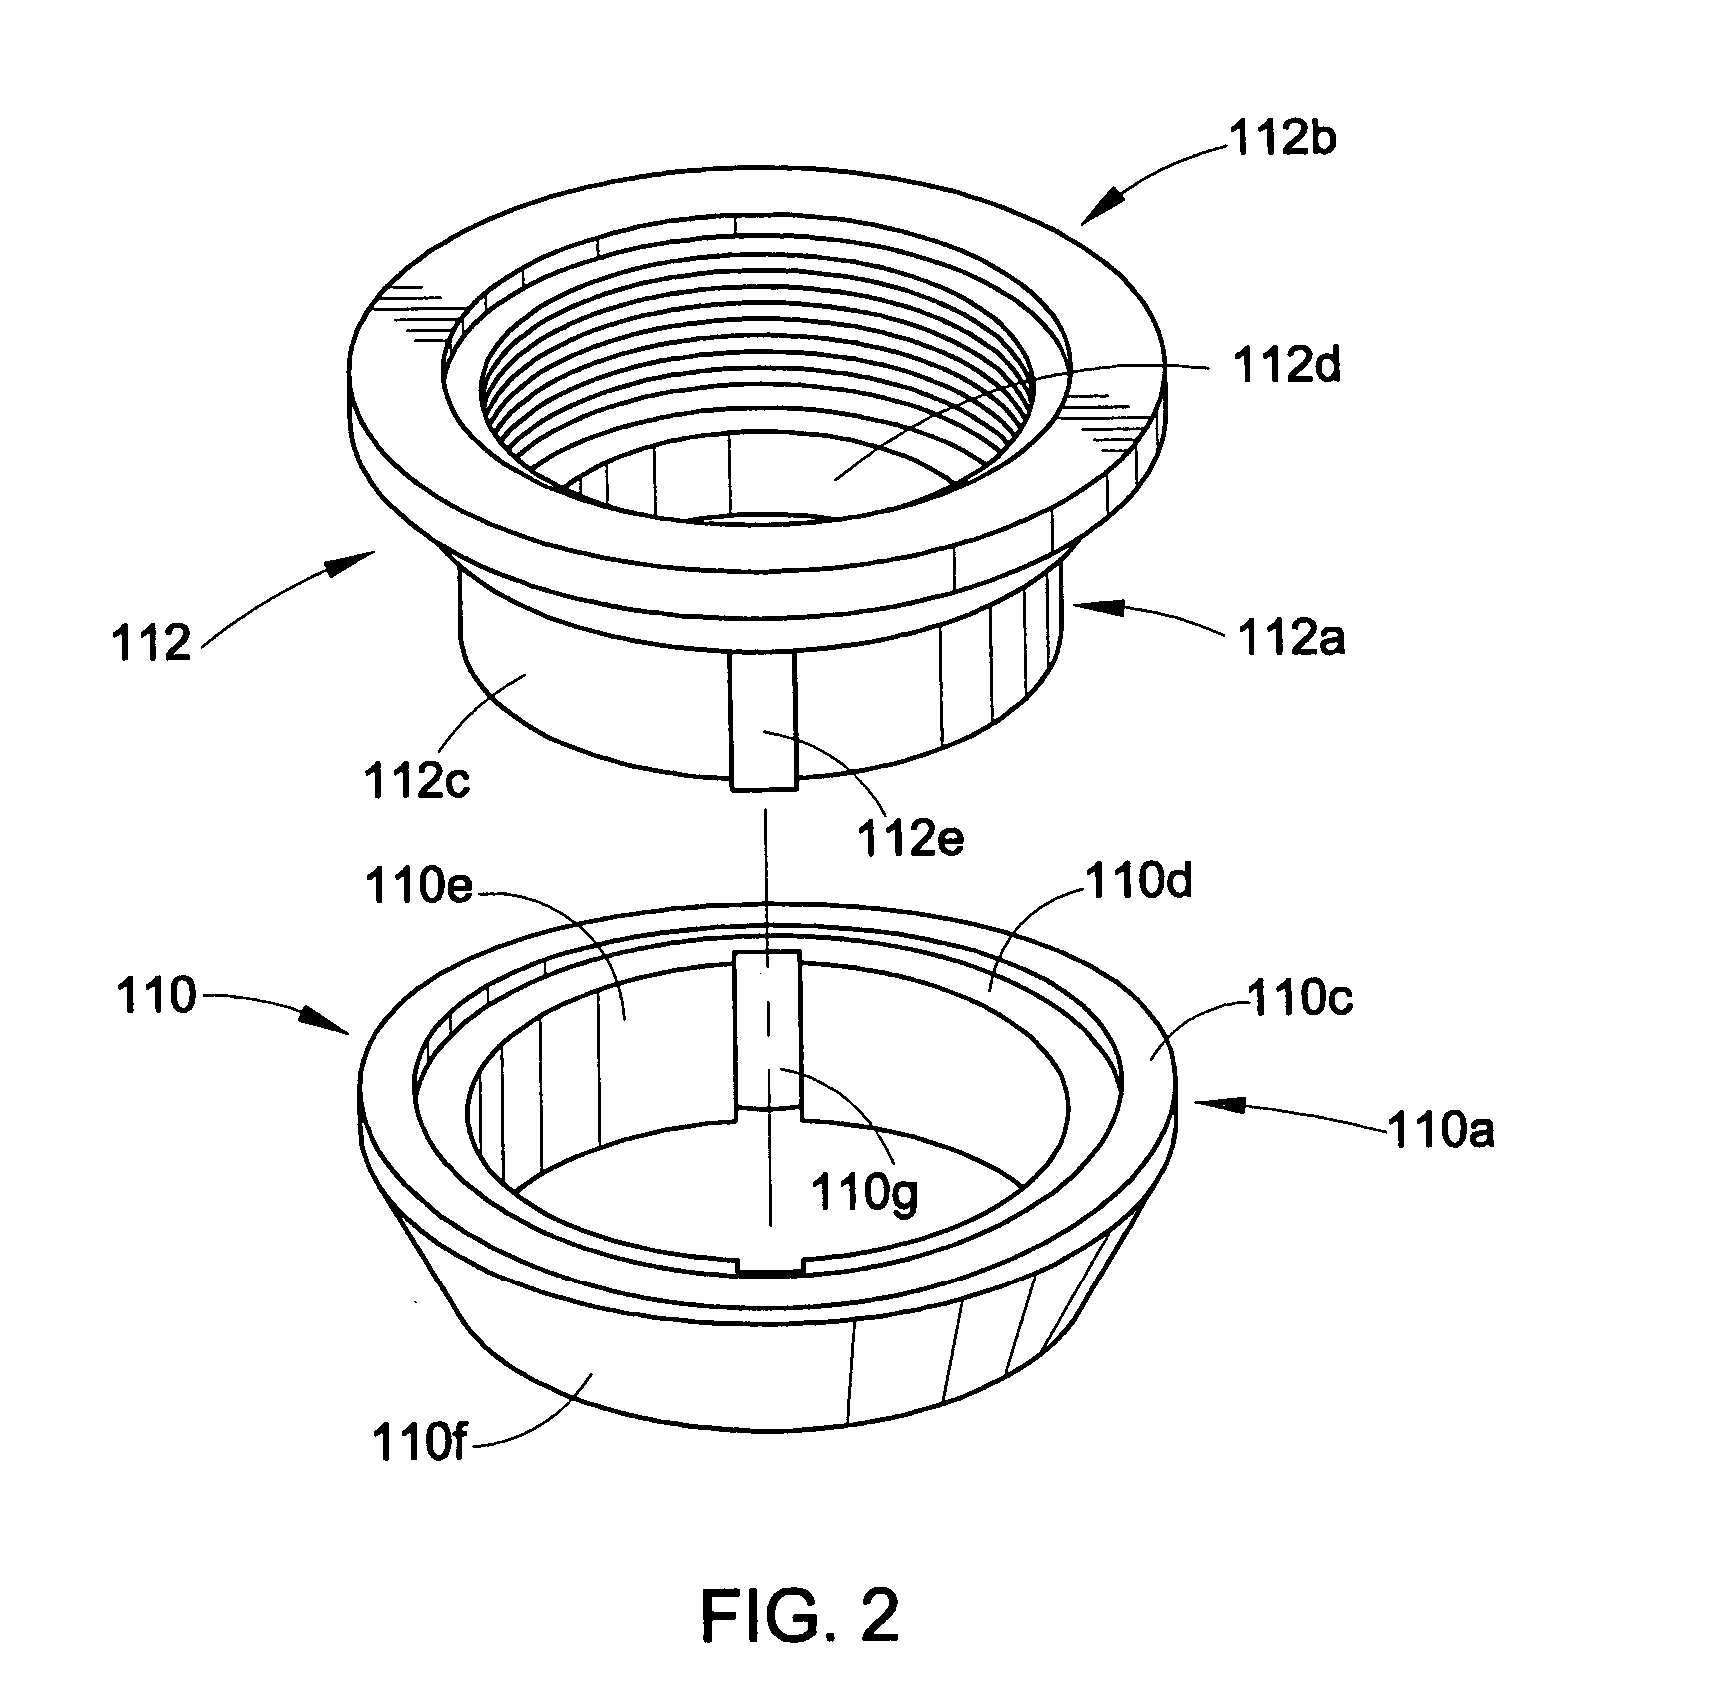 Filament-reinforced composite thermoplastic pressure vessel fitting assembly and method